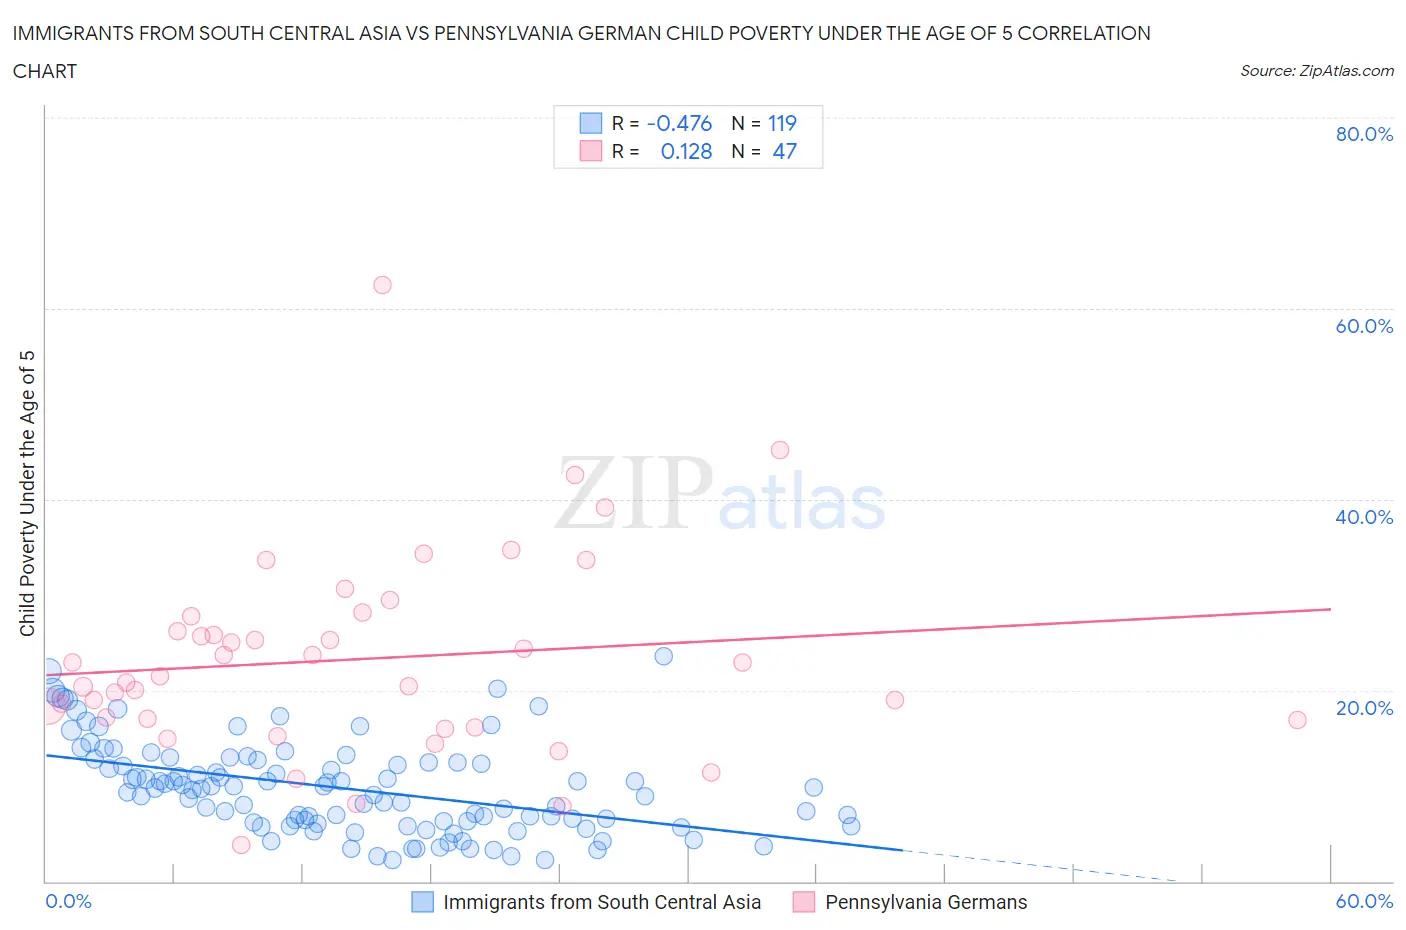 Immigrants from South Central Asia vs Pennsylvania German Child Poverty Under the Age of 5